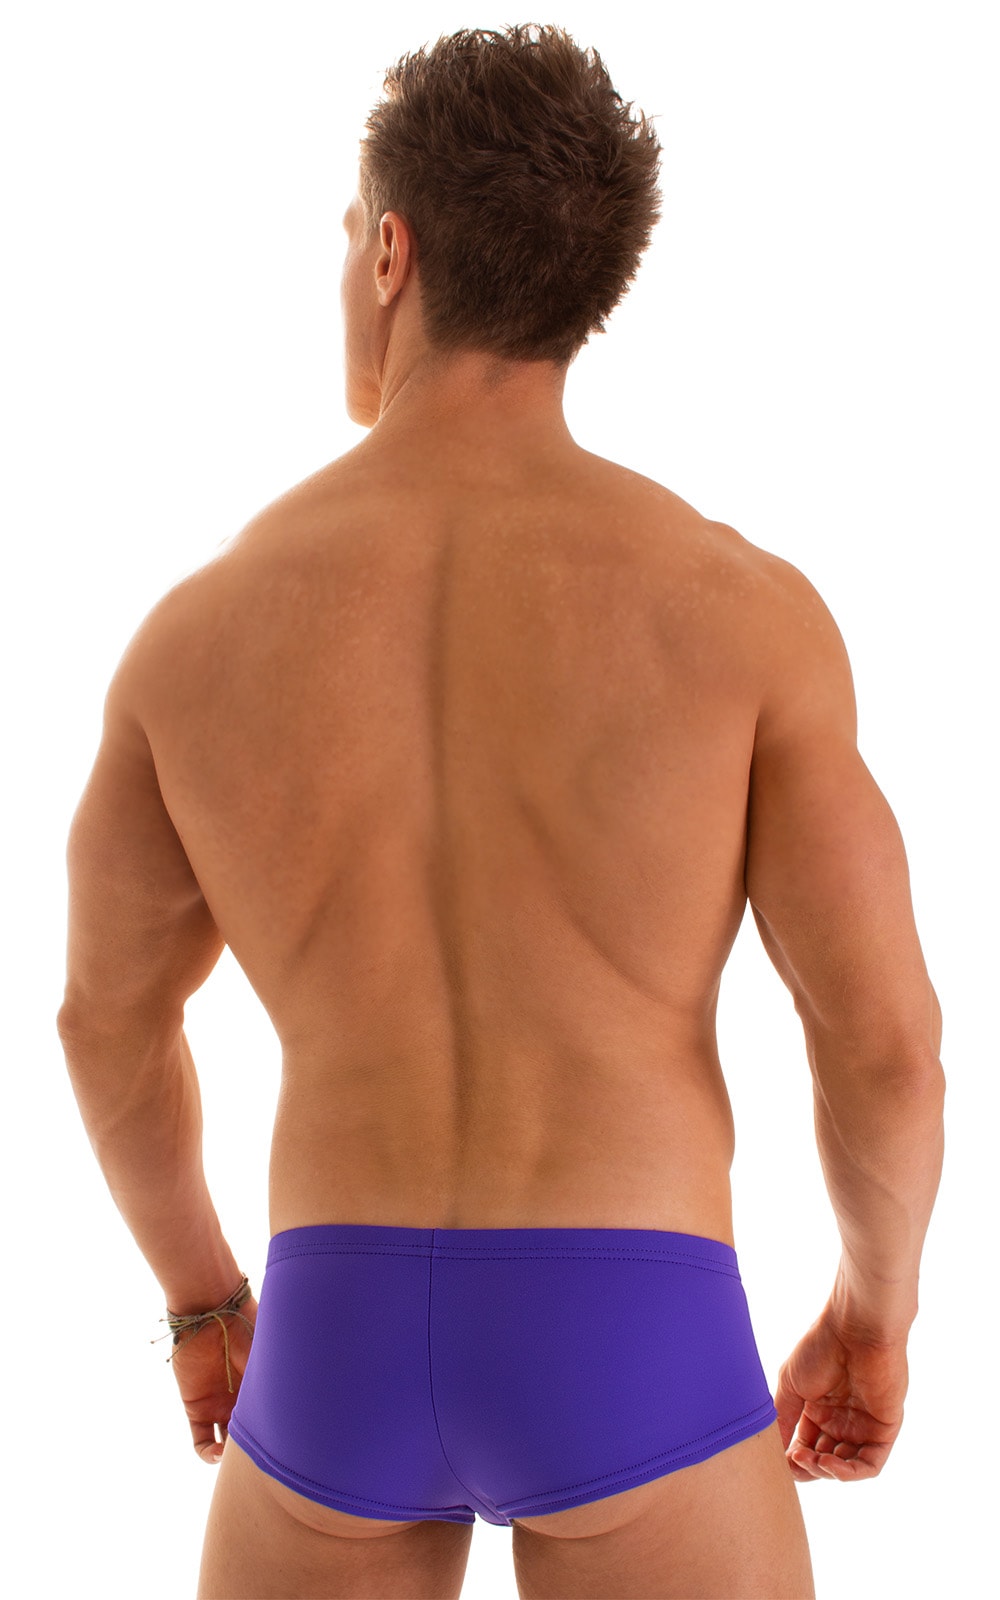 Pouch Enhanced Micro Square Cut Swim Trunks in Indaco, Rear View